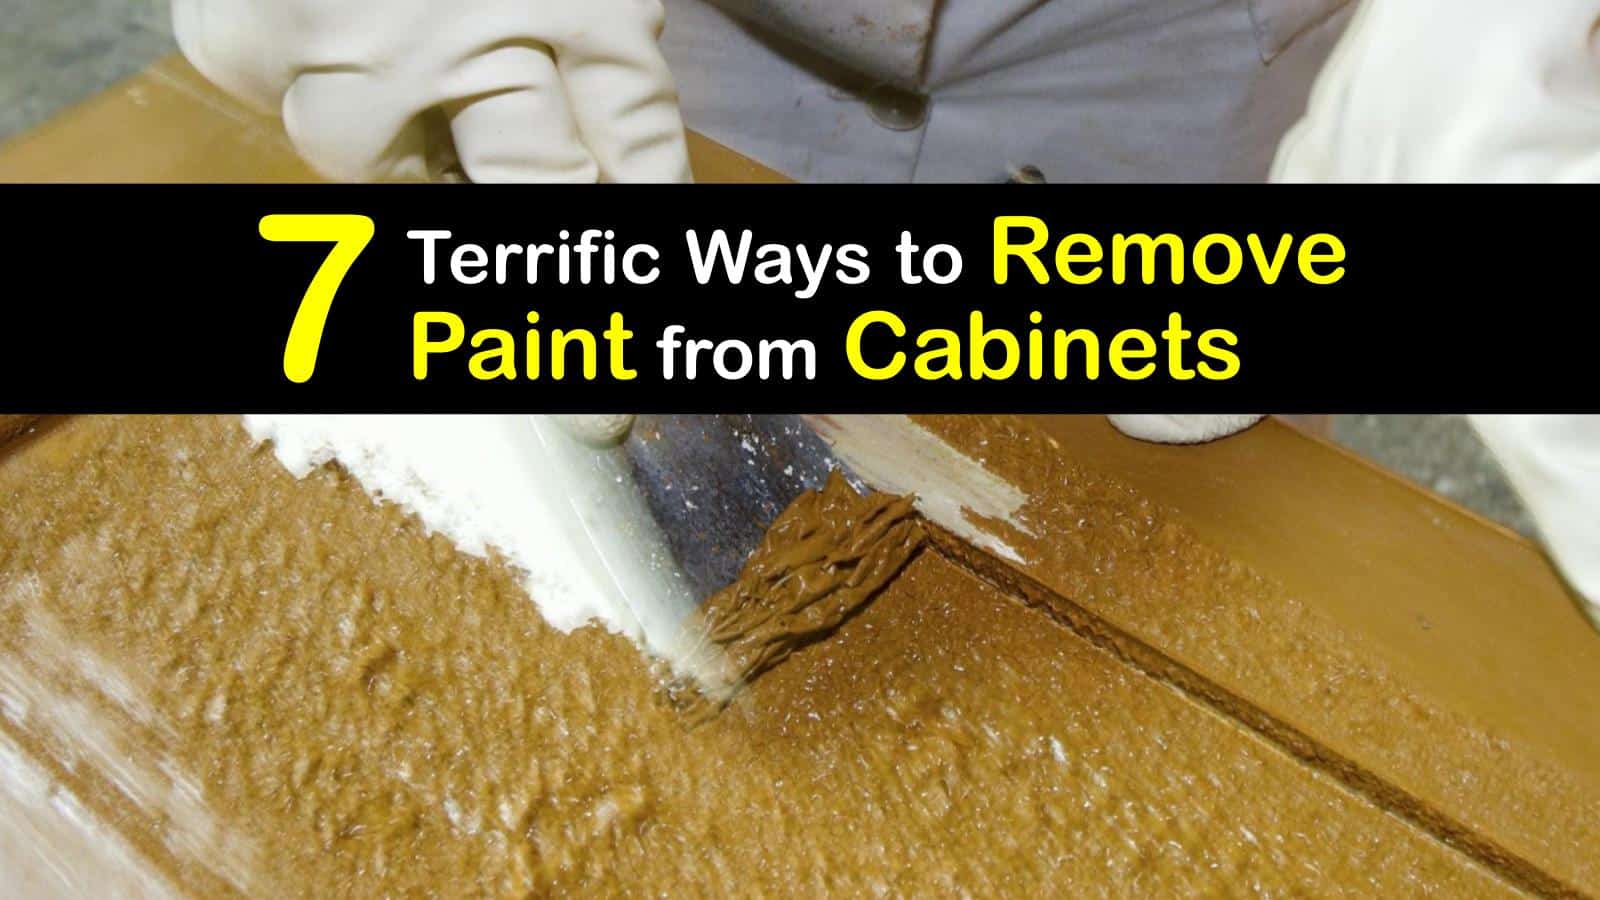 7 Terrific Ways To Remove Paint From Cabinets